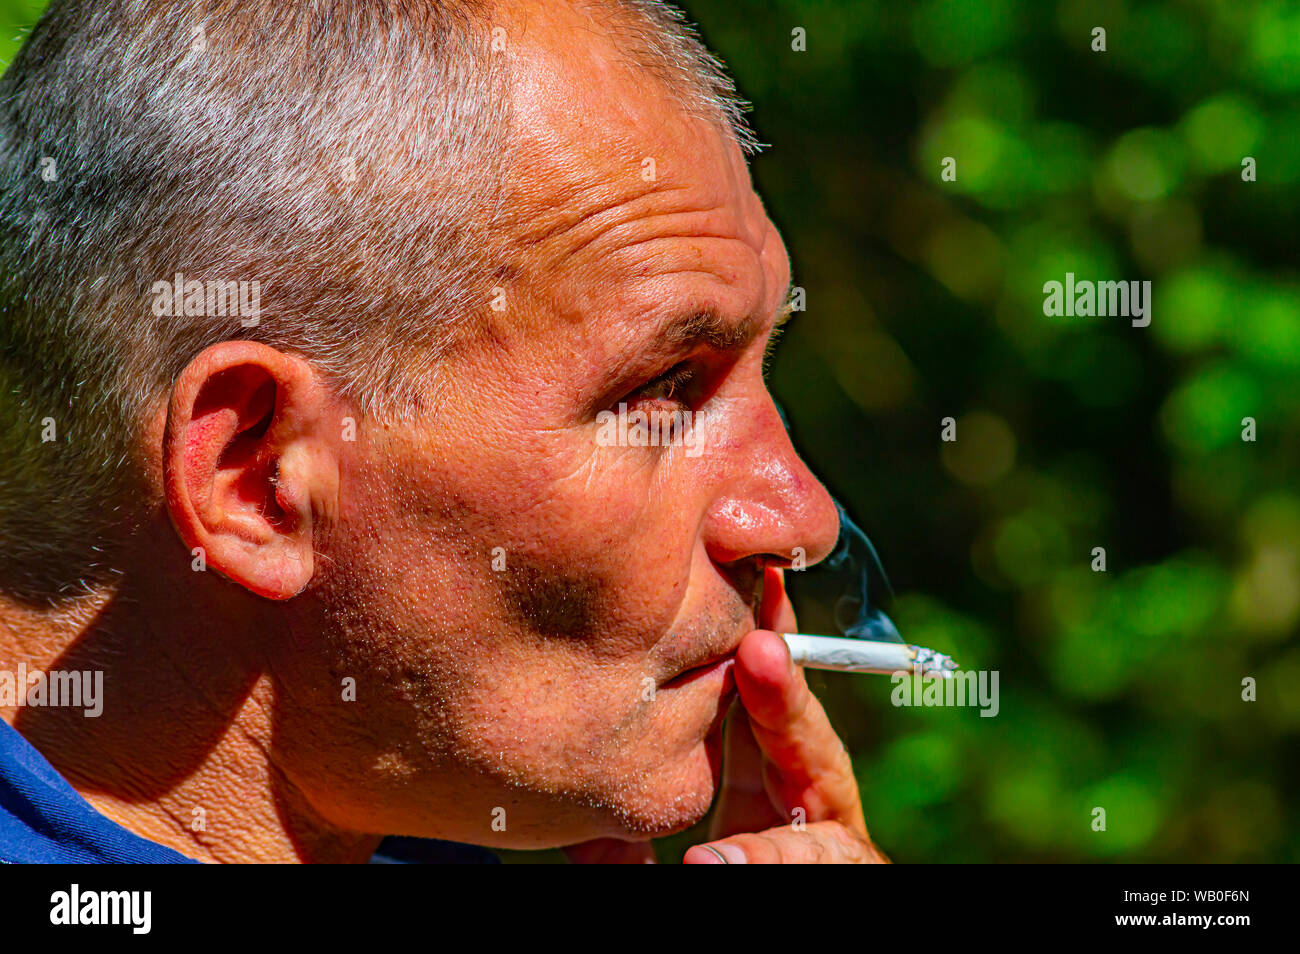 The gray-haired man smokes a cigarette. Outdoors. Mature age. Social problems. Health and medicine. Loneliness in old age. Stock Photo